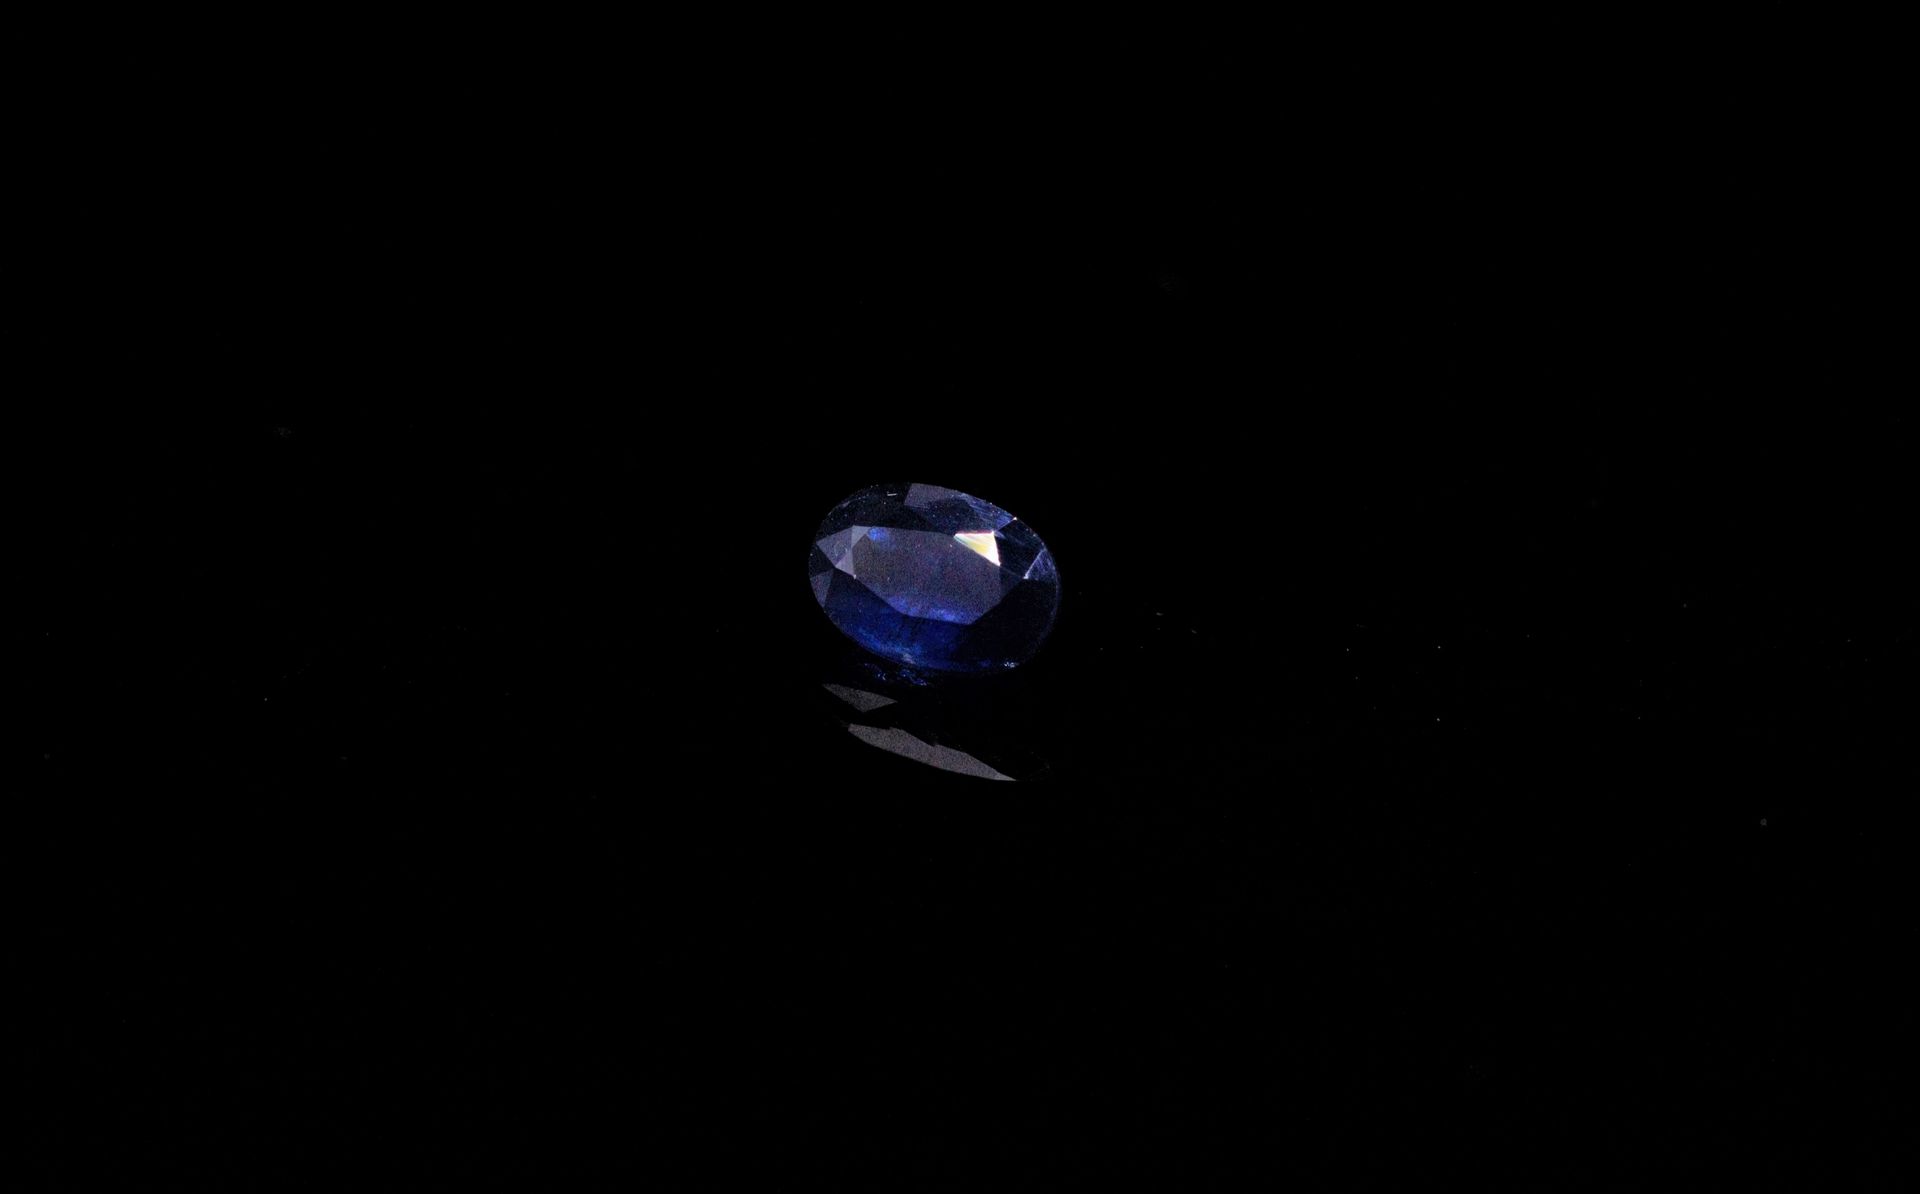 Null Oval sapphire on paper. 
Weight : 0.74 ct. 
Dimensions : 6.3 mm x 4.2 mm